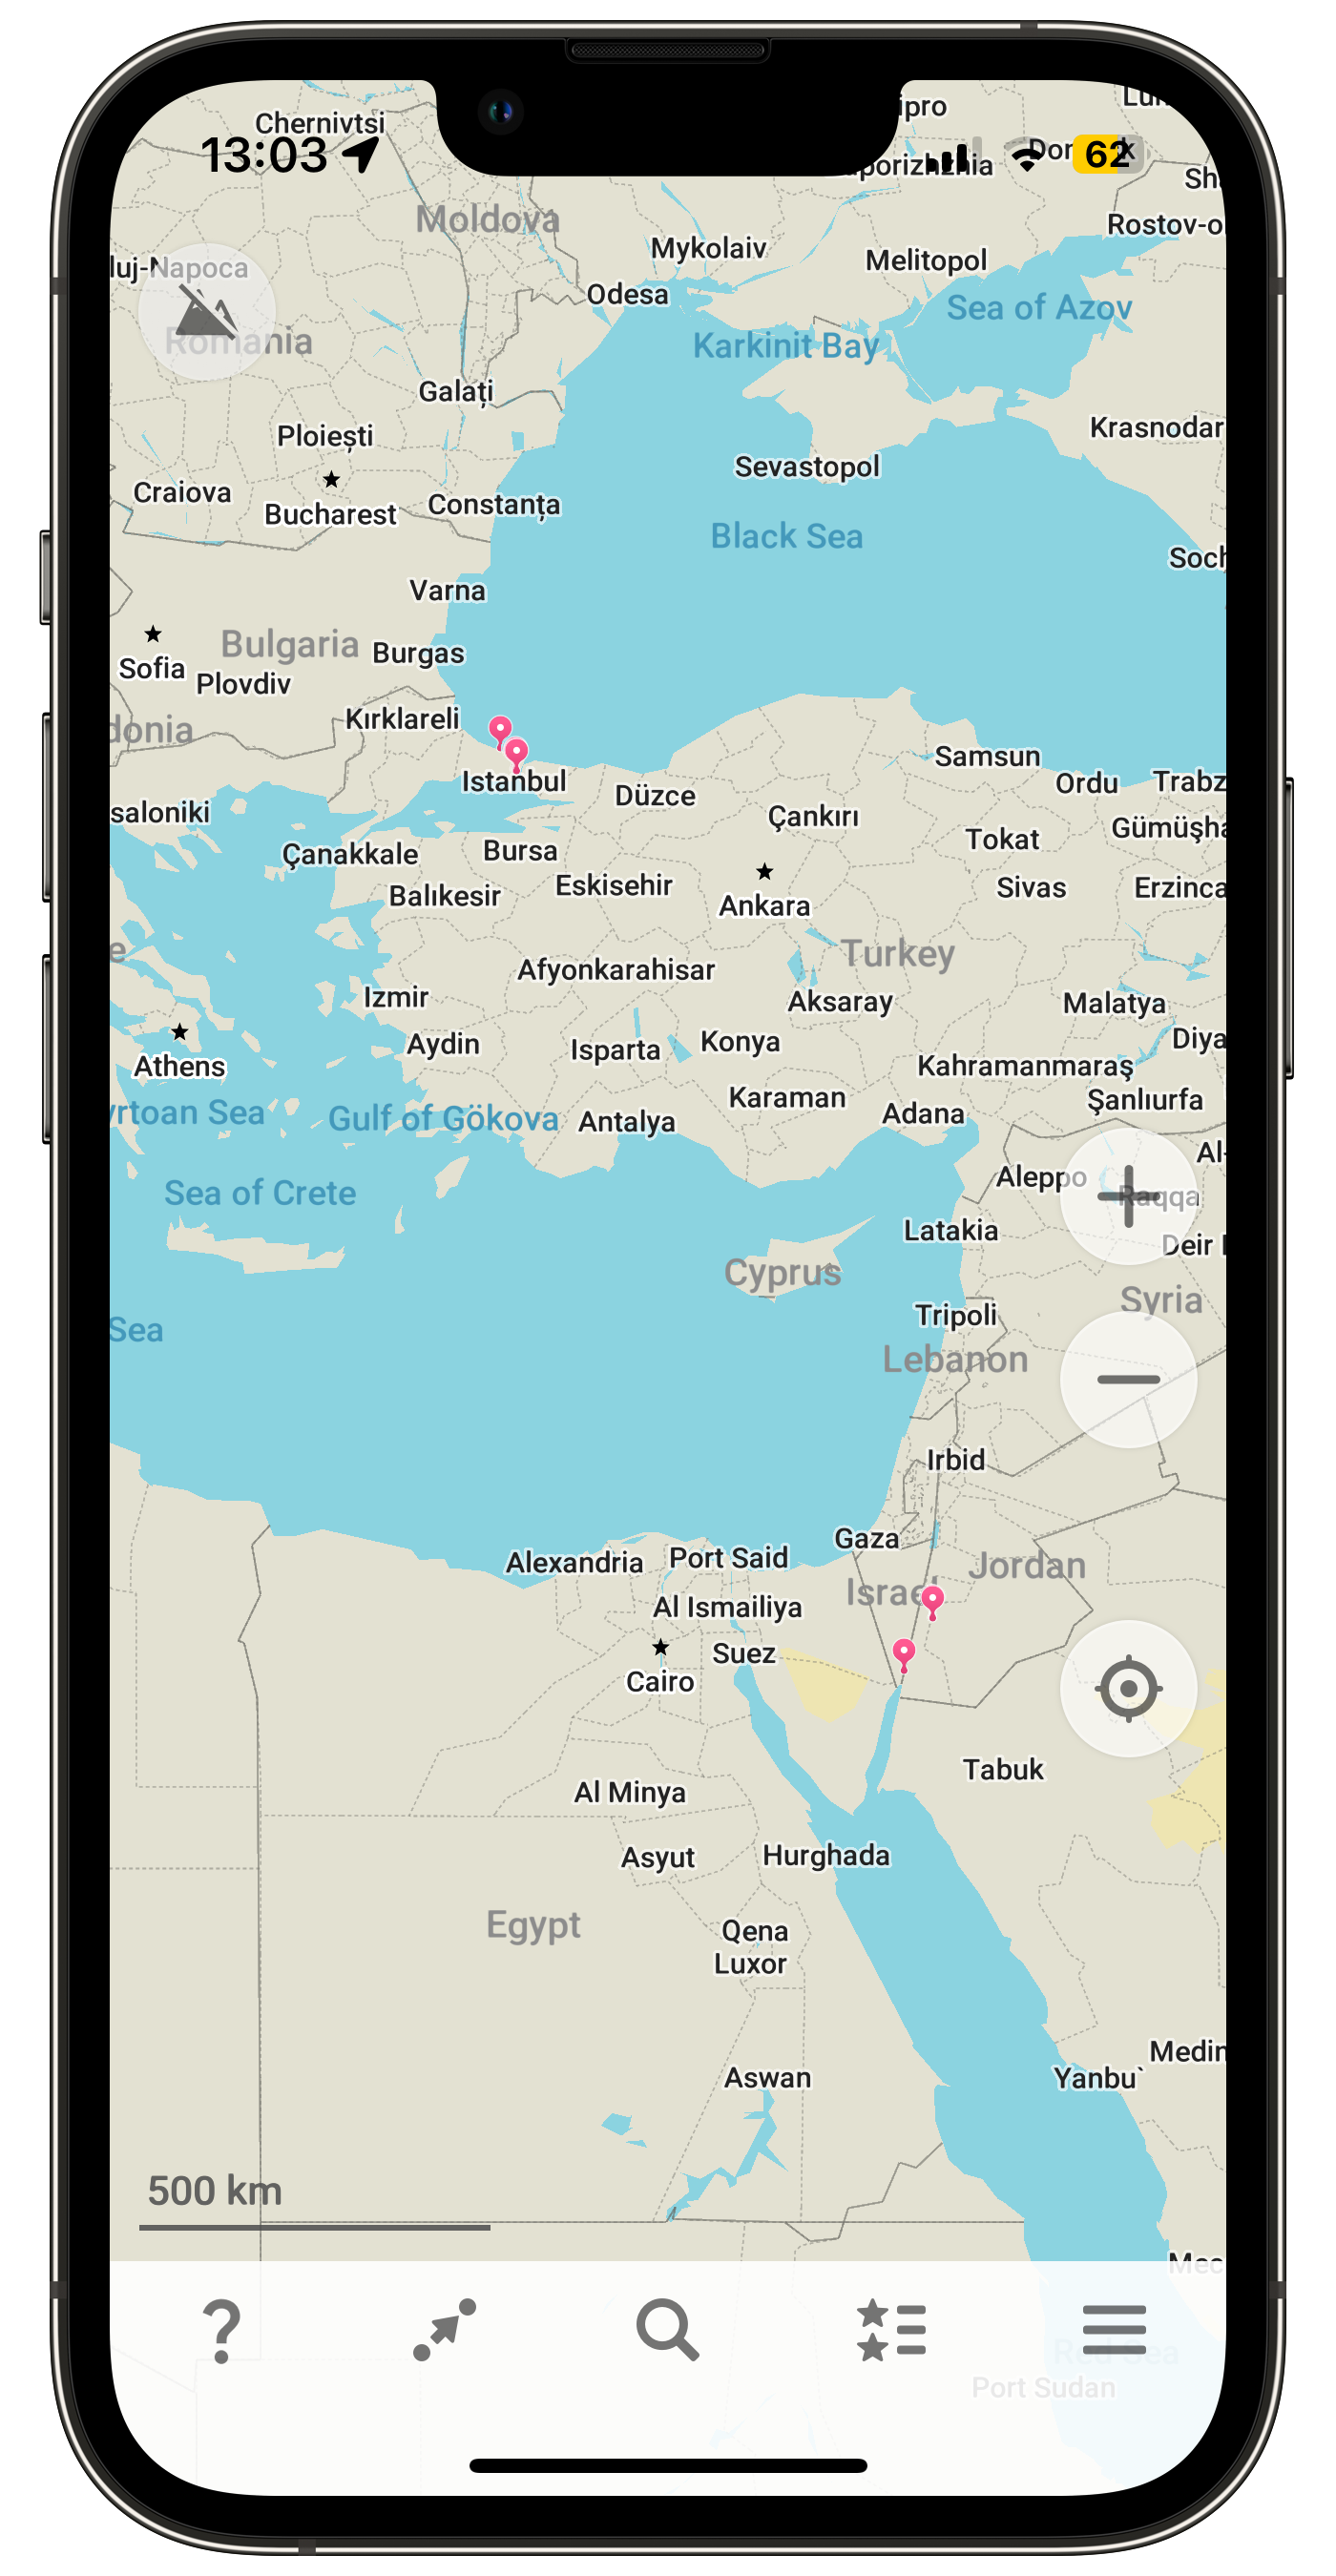 Organic Maps on iOS, with some markers on Istanbul and Aqaba/Petra.